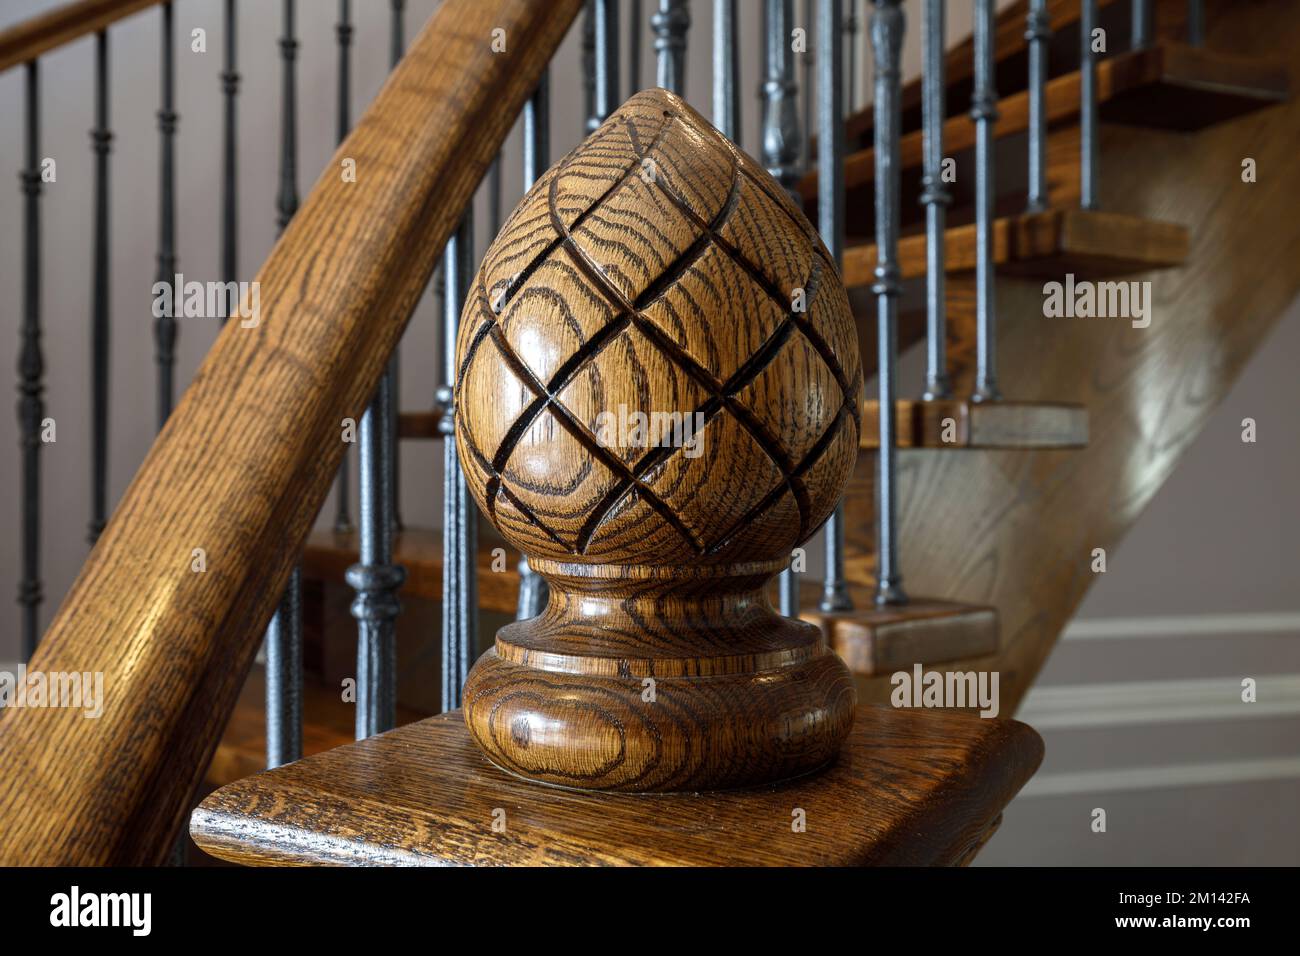 A decorative newel cap made out of wood and stained.  This house has since been demolished. Stock Photo